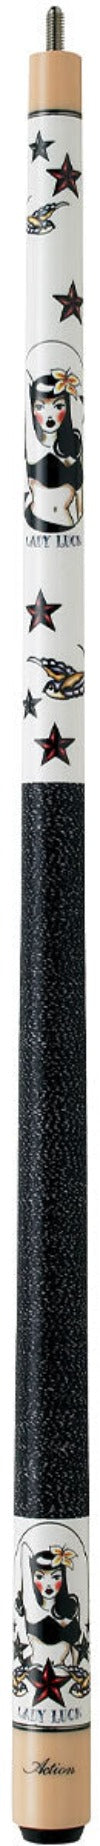 Action Action ADV81 Pool Cue Pool Cue